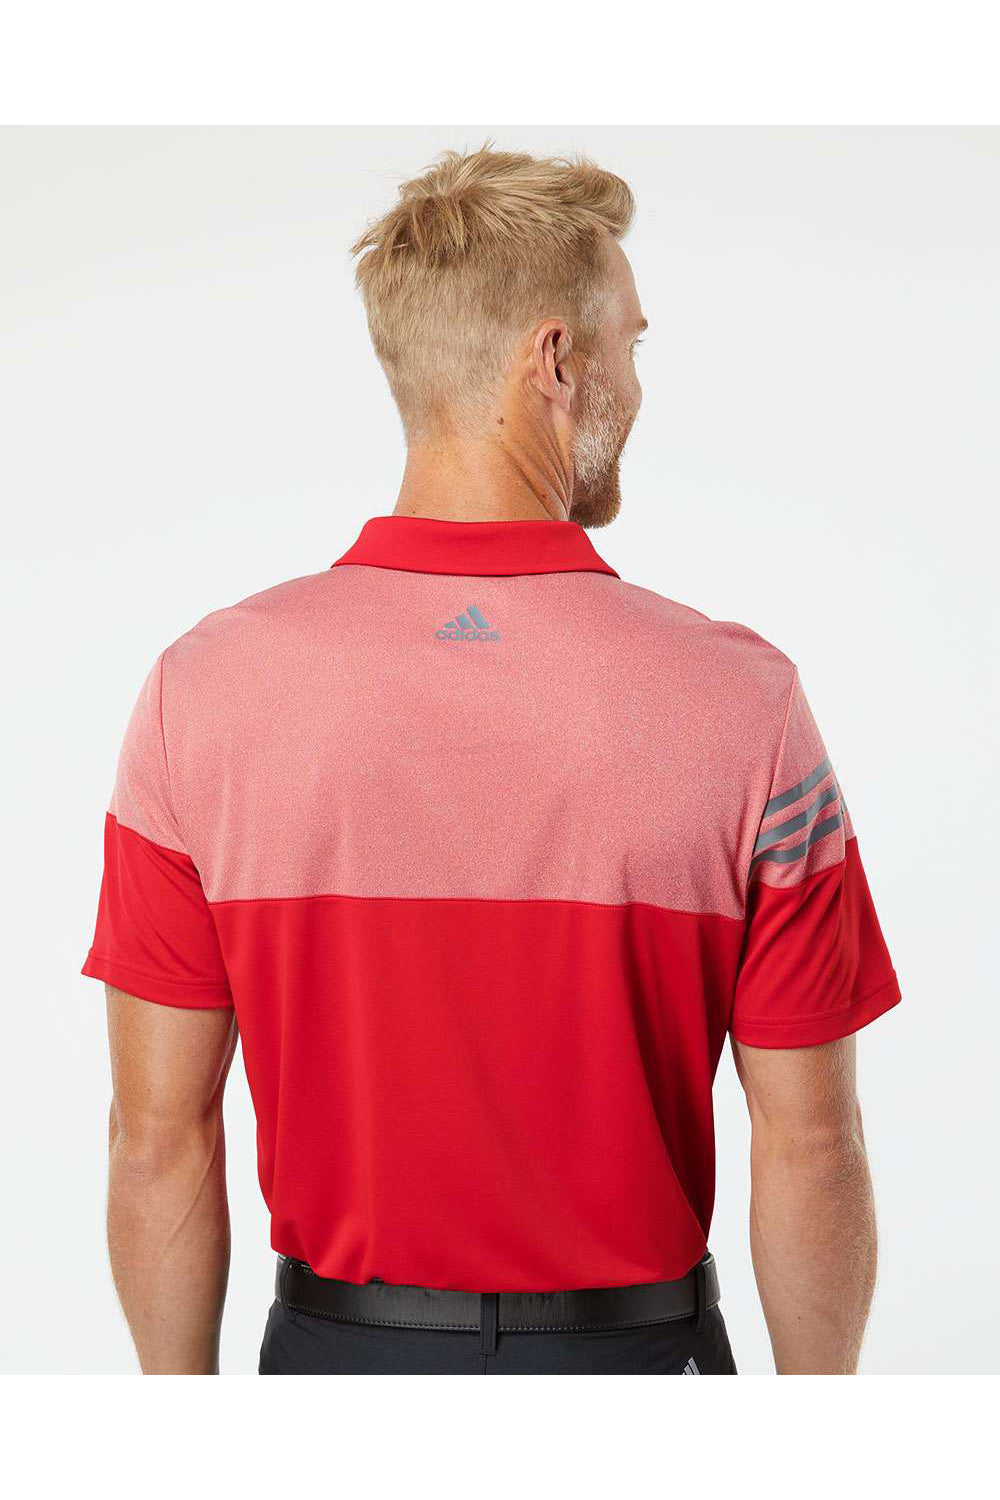 Adidas A213 Mens 3 Stripes Heathered Colorblock Short Sleeve Polo Shirt Power Red Model Back